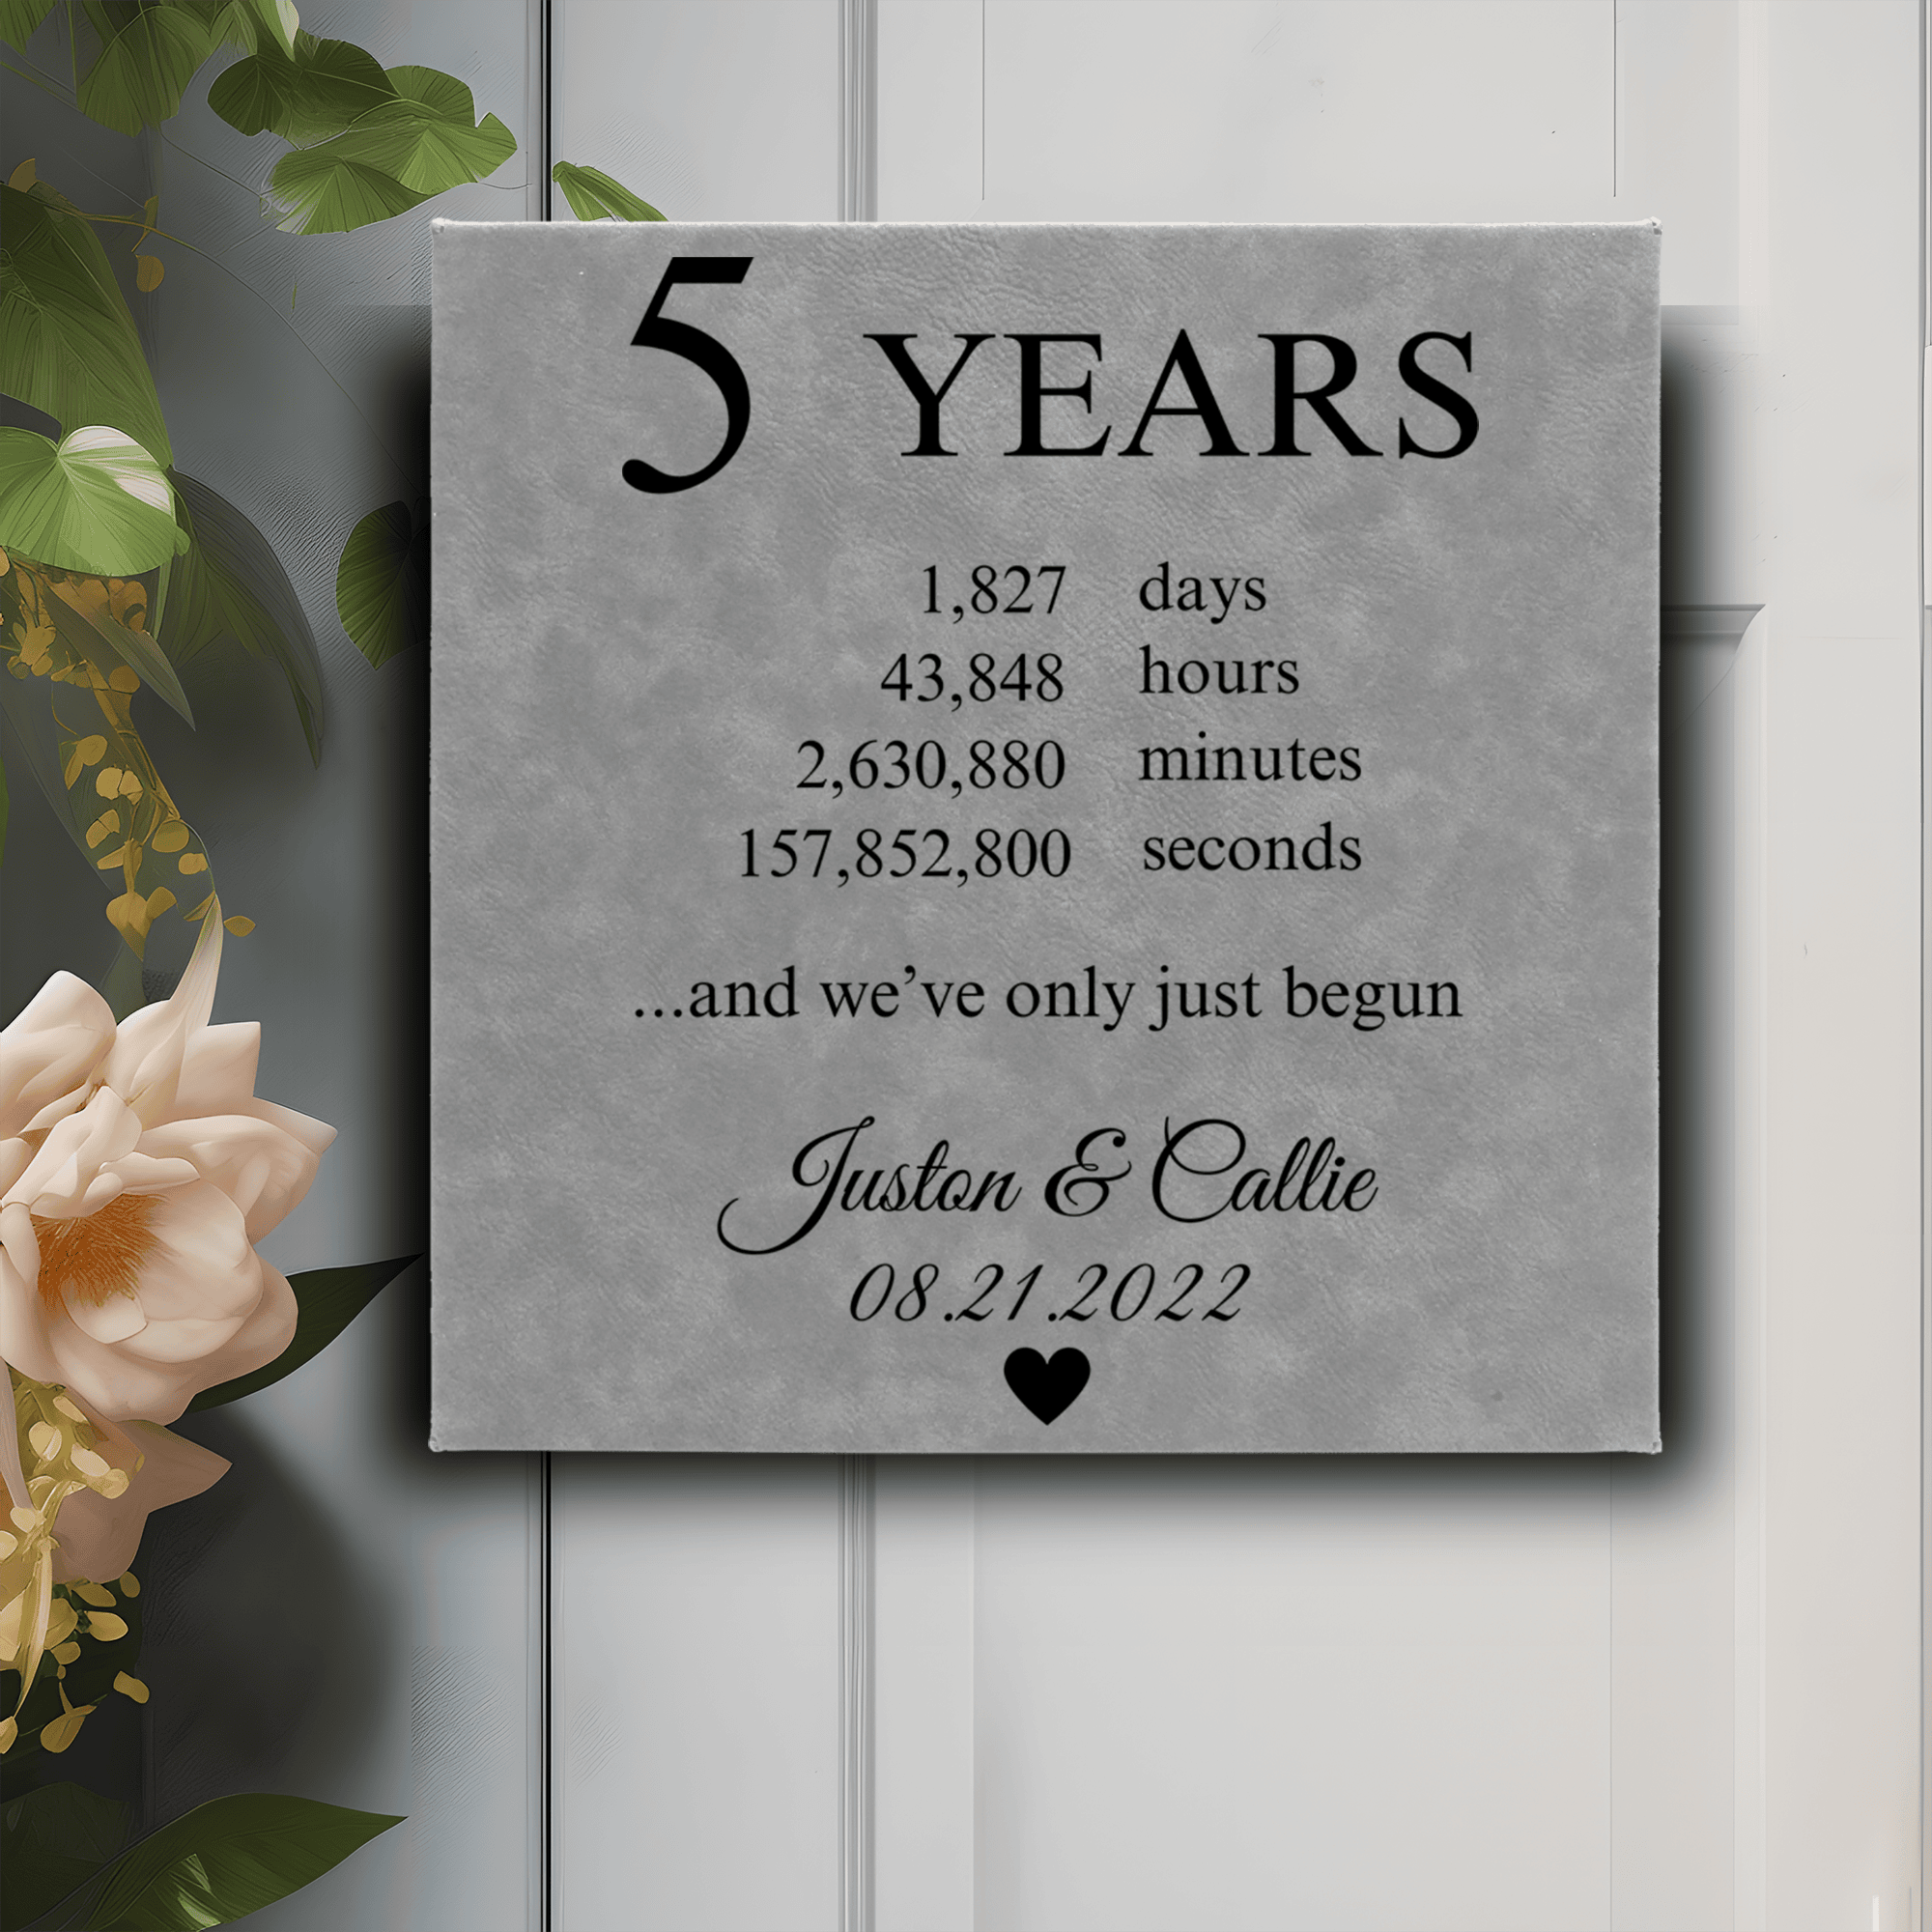 Grey Leather Wall Decor With 5 Year Anniversary Design